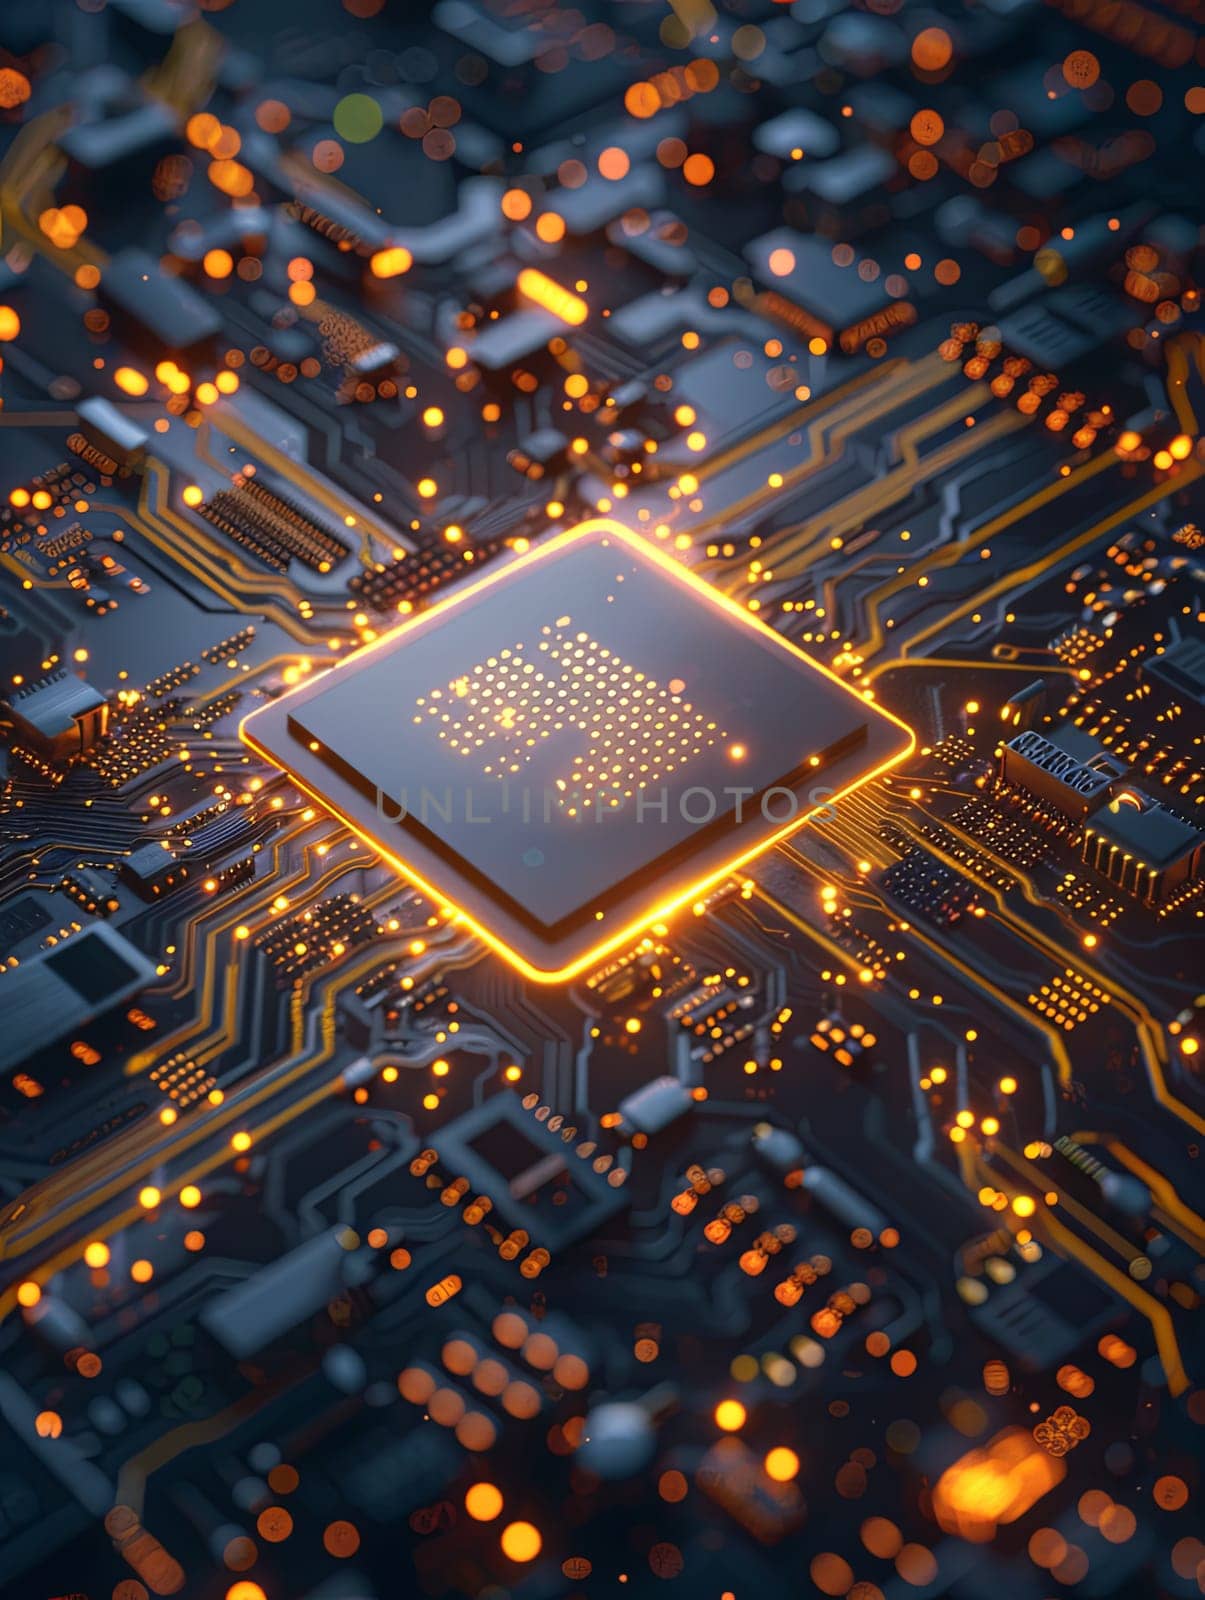 A close-up shot of a modern microprocessor on a motherboard, surrounded by intricate digital data streams and glowing light effects, symbolizing the power of AI.